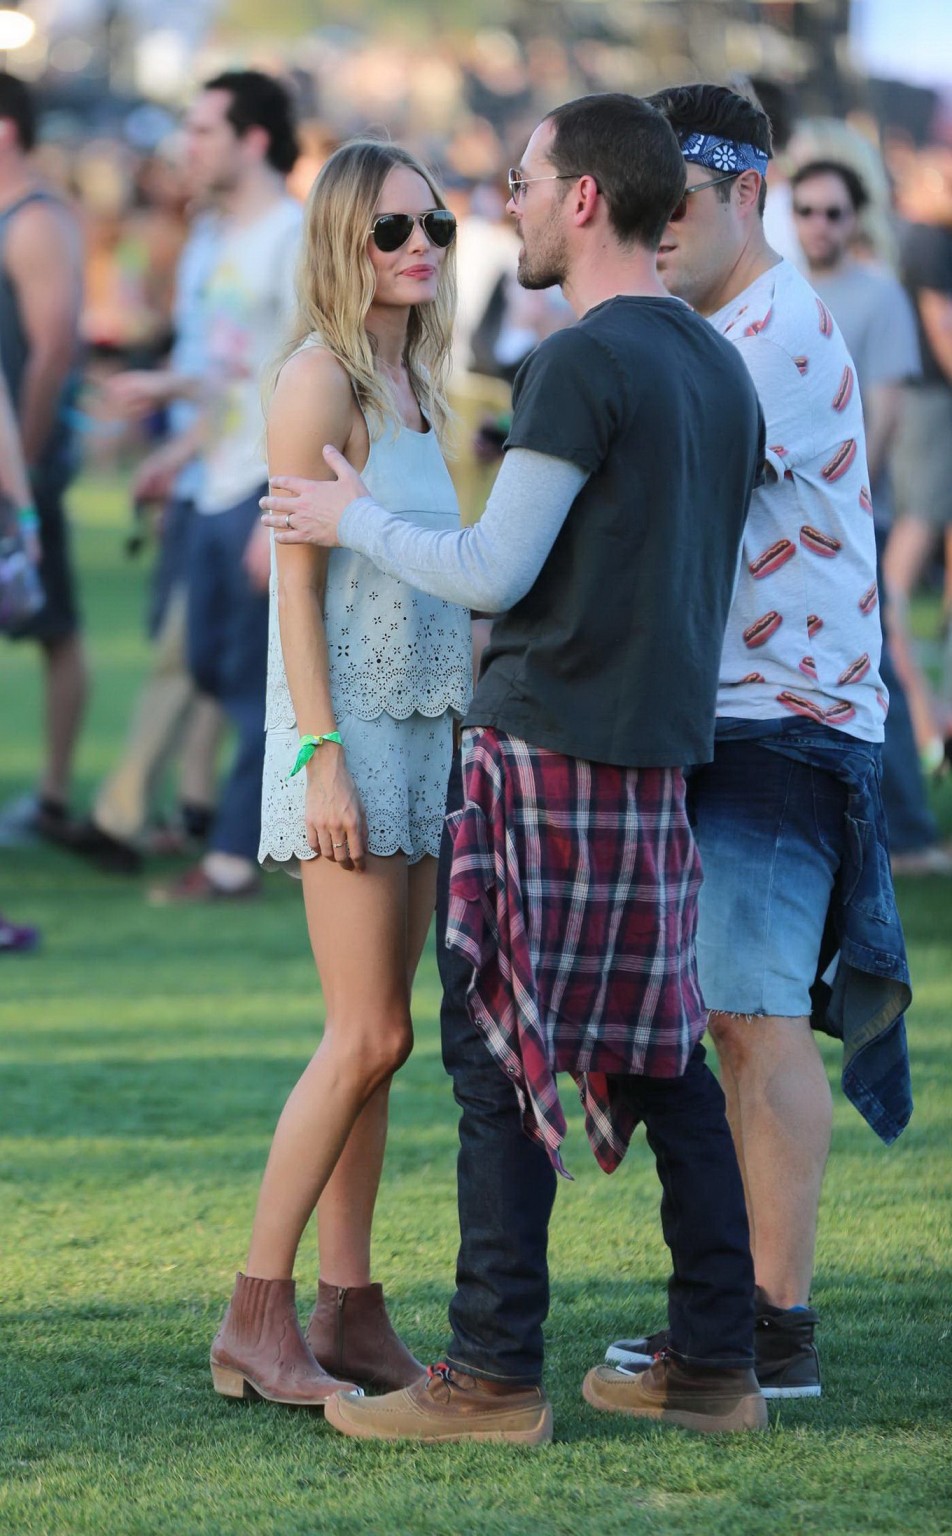 Kate Bosworth leggy wearing retro shorts and top at Coachella Music and Arts Fes #75235378